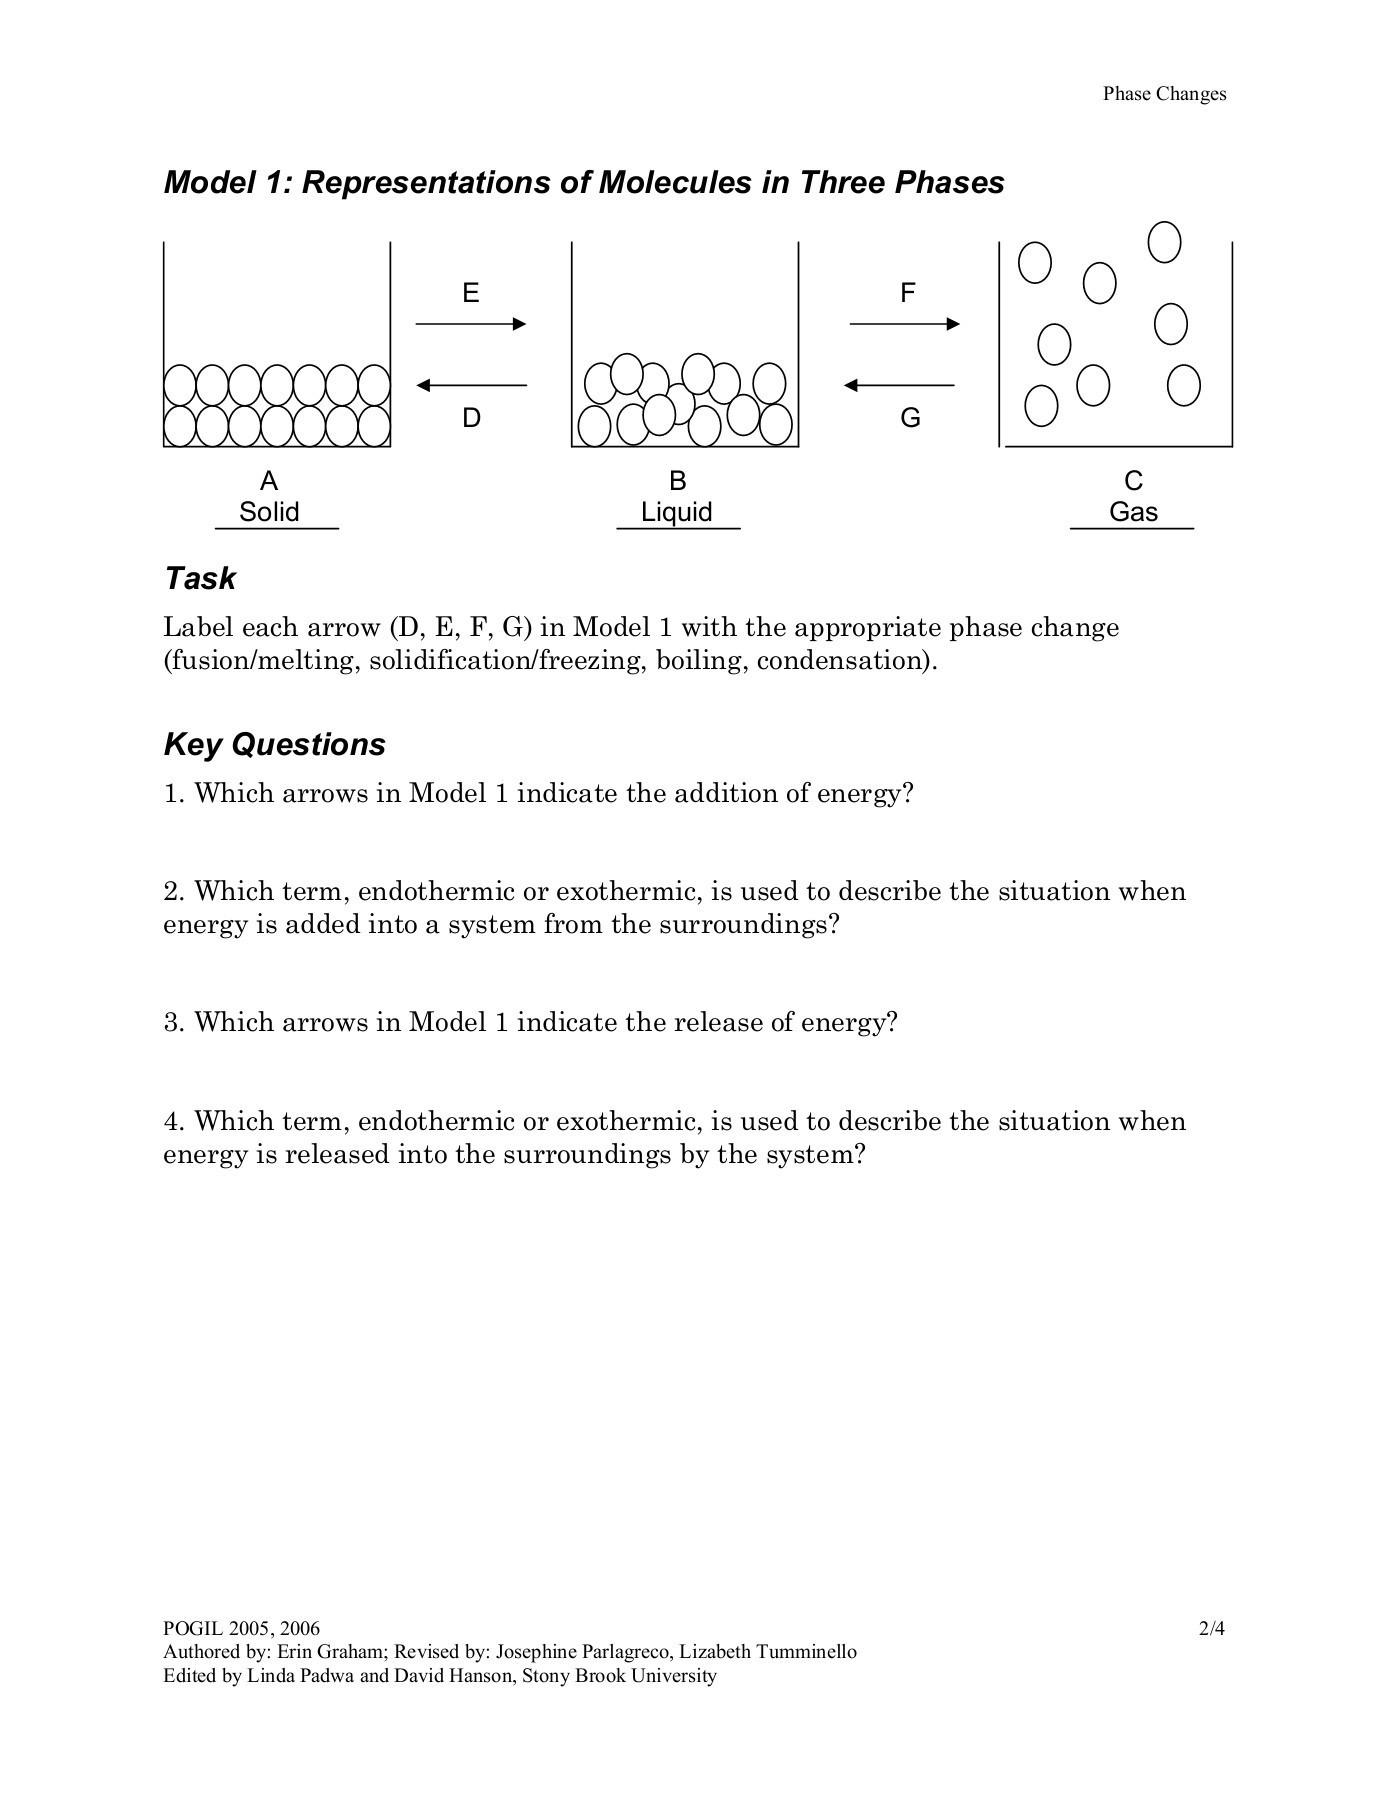 Phase Change Worksheet Answers Phase Changes Pogil Pages 1 4 Text Version